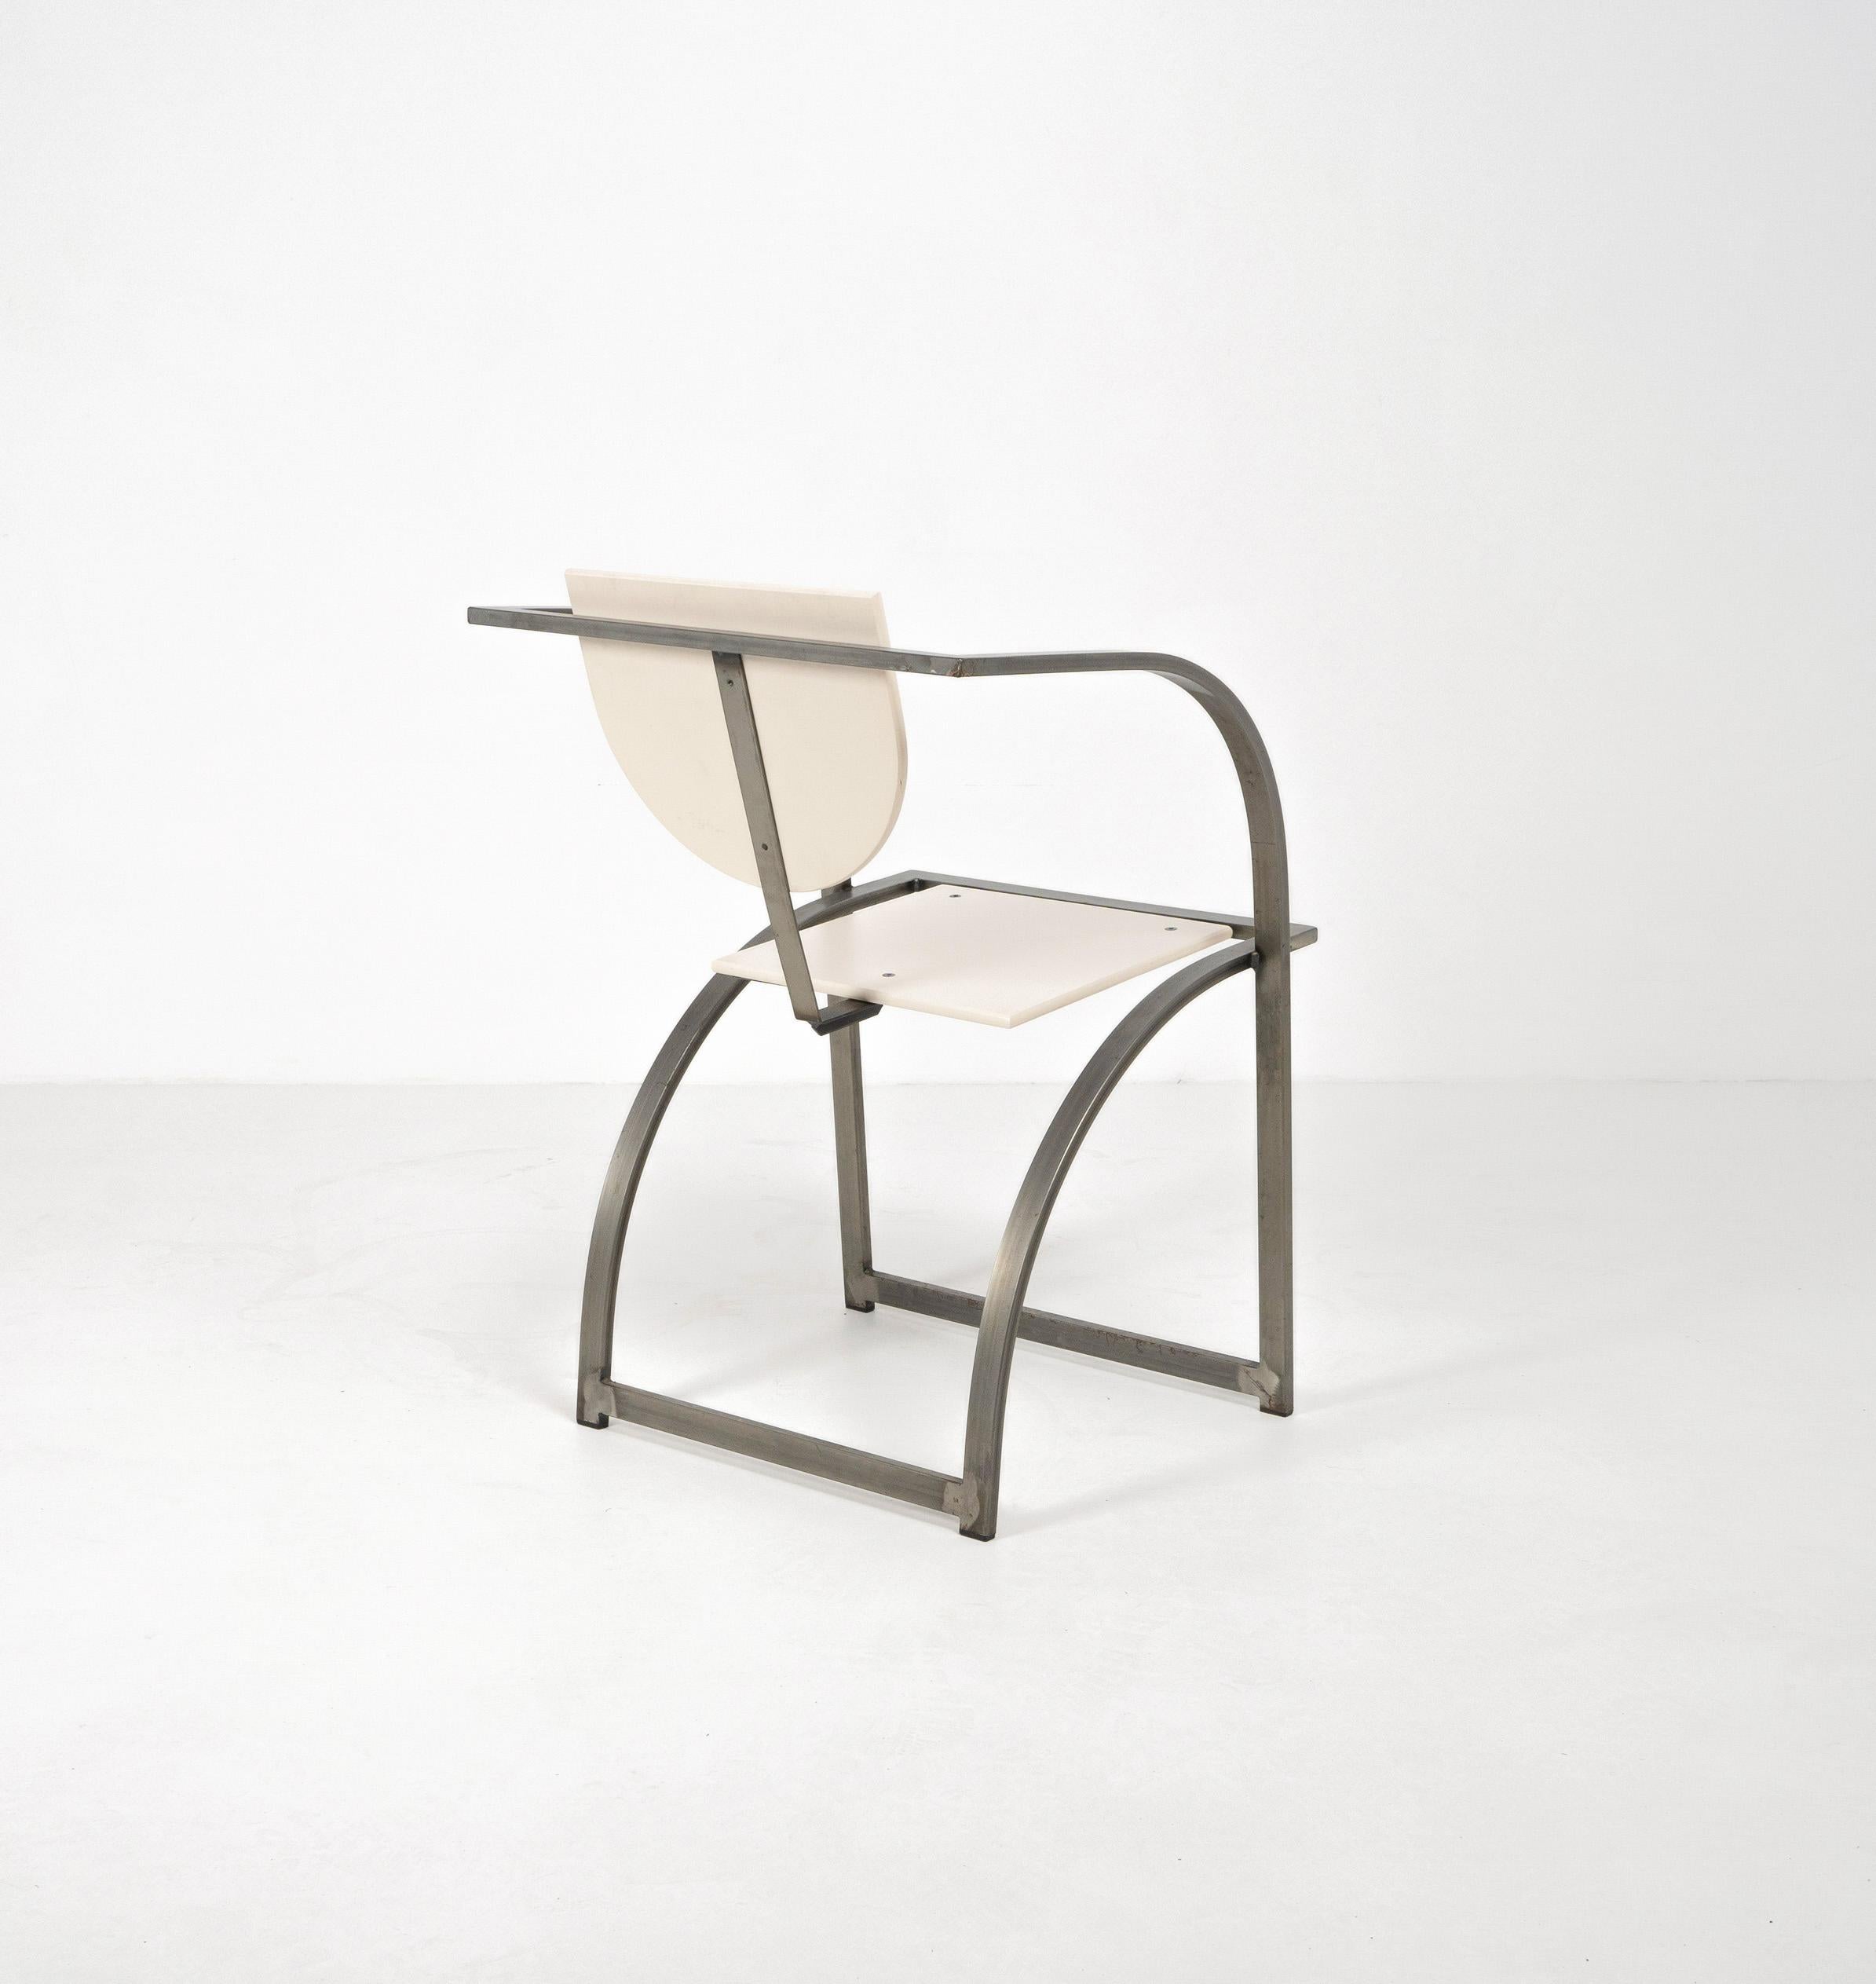 Postmodern steel 'Sinus' chair designed by Karl Friedrich Förster. Composed of a tubular steel frame with an off white painted plywood seat and backrest.

Dimensions (cm, approx): 
Height: 82
Width: 55
Depth: 58
Height to seat: 45

Condition: